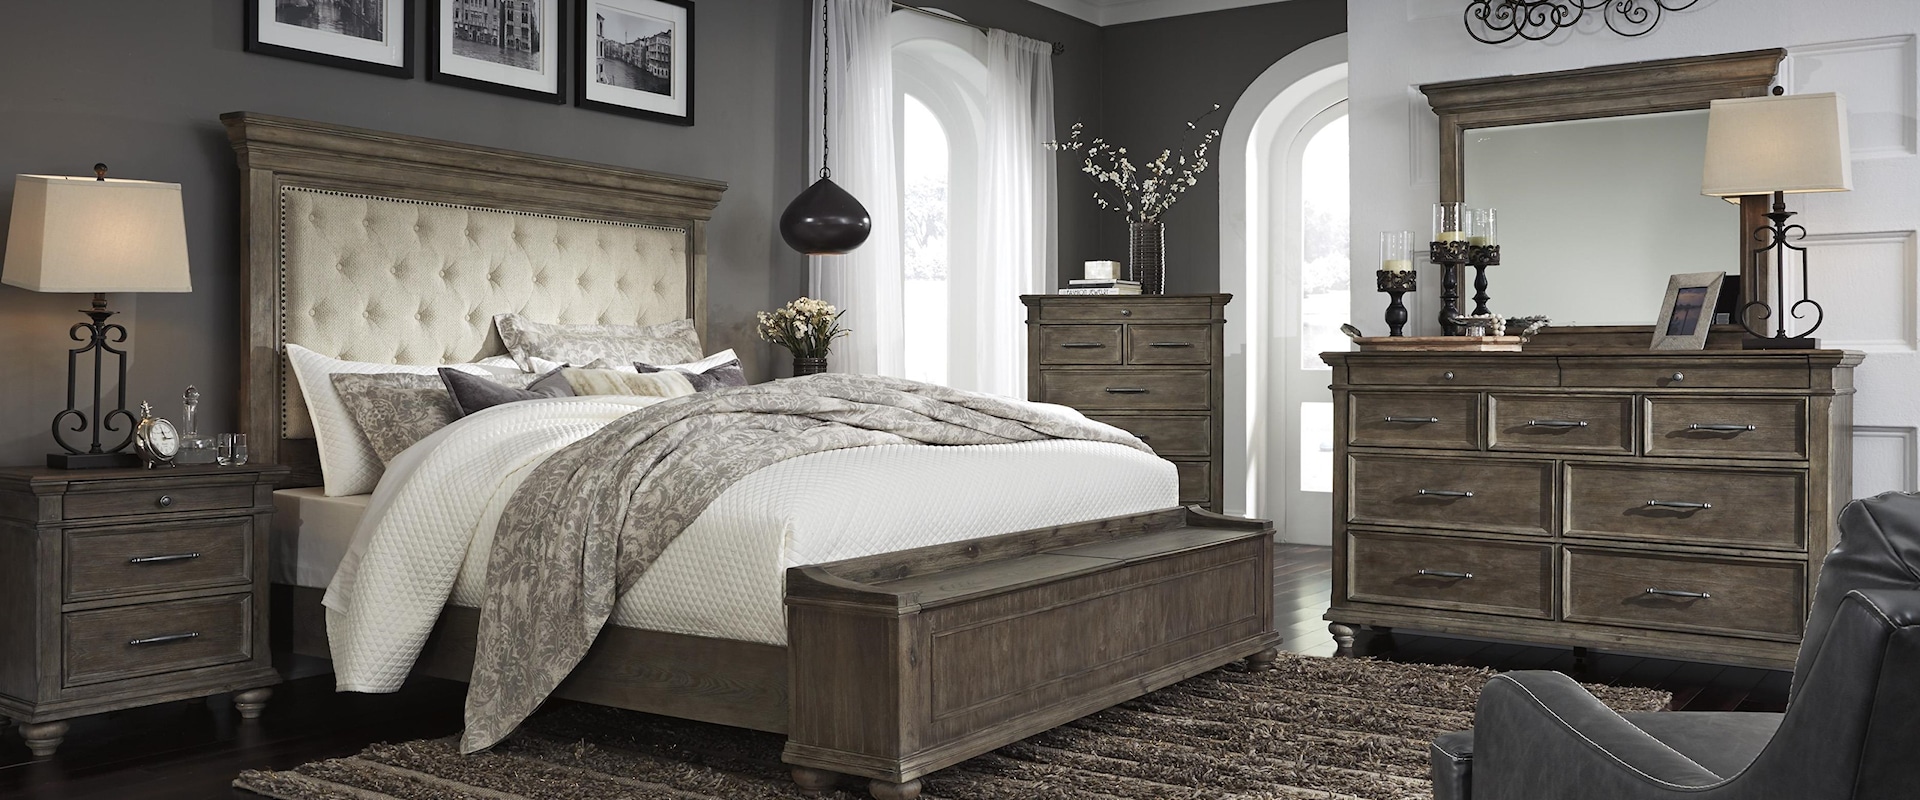 Queen Upholstered Bed with Storage Footboard, Dresser, Mirror, Nightstand and Chest